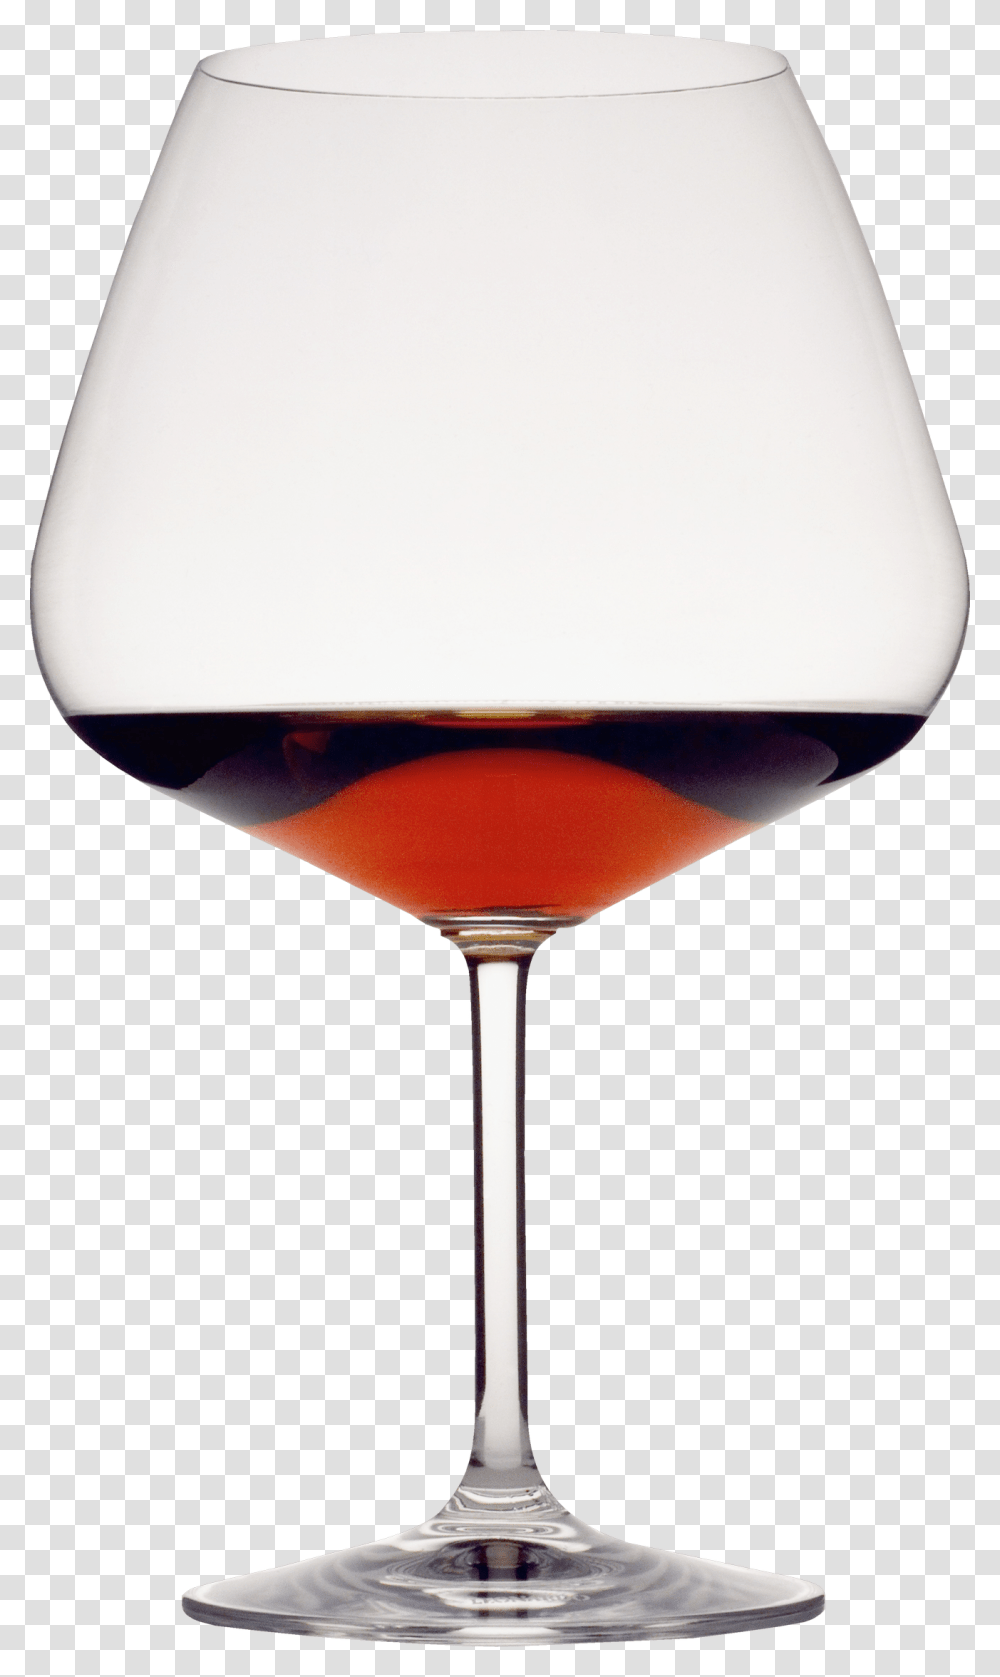 Wine Glass Image Background Vector Wine Glass, Lamp, Cocktail, Alcohol, Beverage Transparent Png